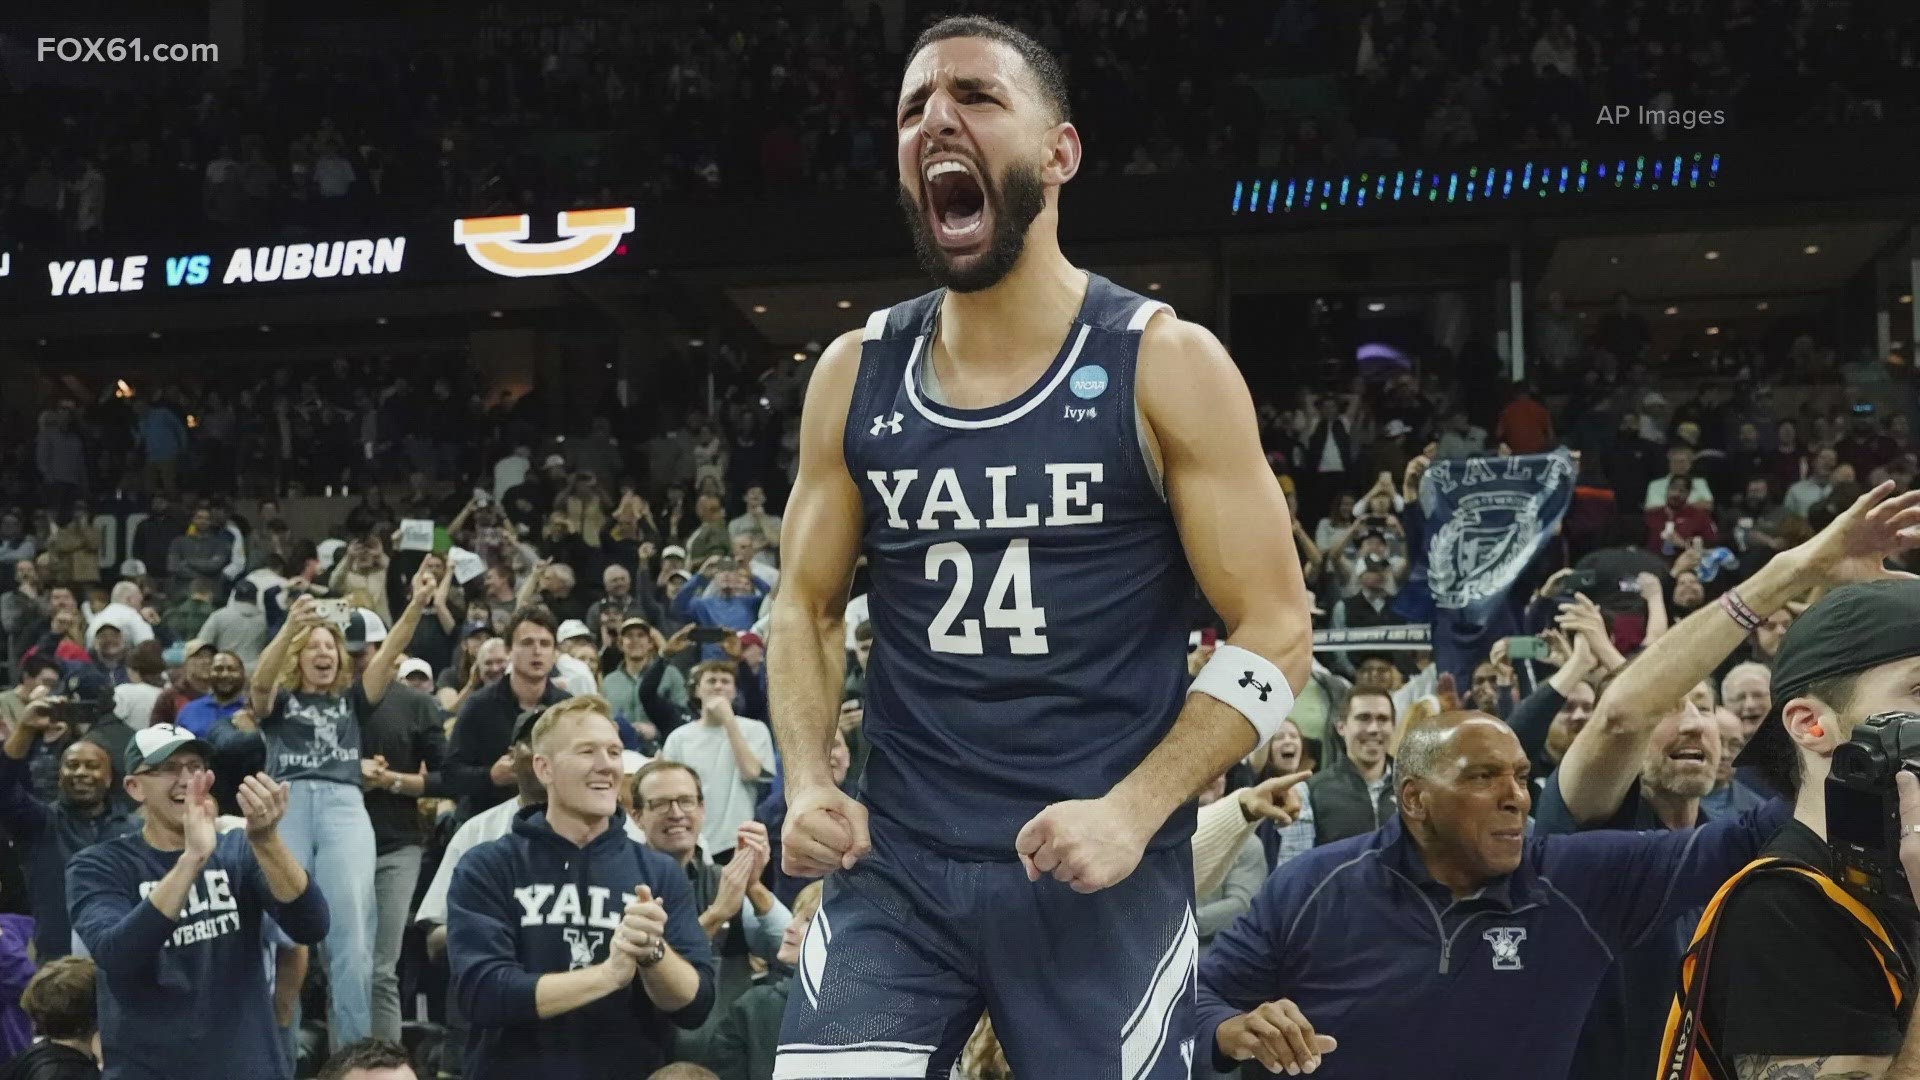 No. 13 seed Yale men's basketball defeated No. 4 seed Auburn 78-76 with a late comeback to secure the program's second NCAA Tournament victory and first since 2016.